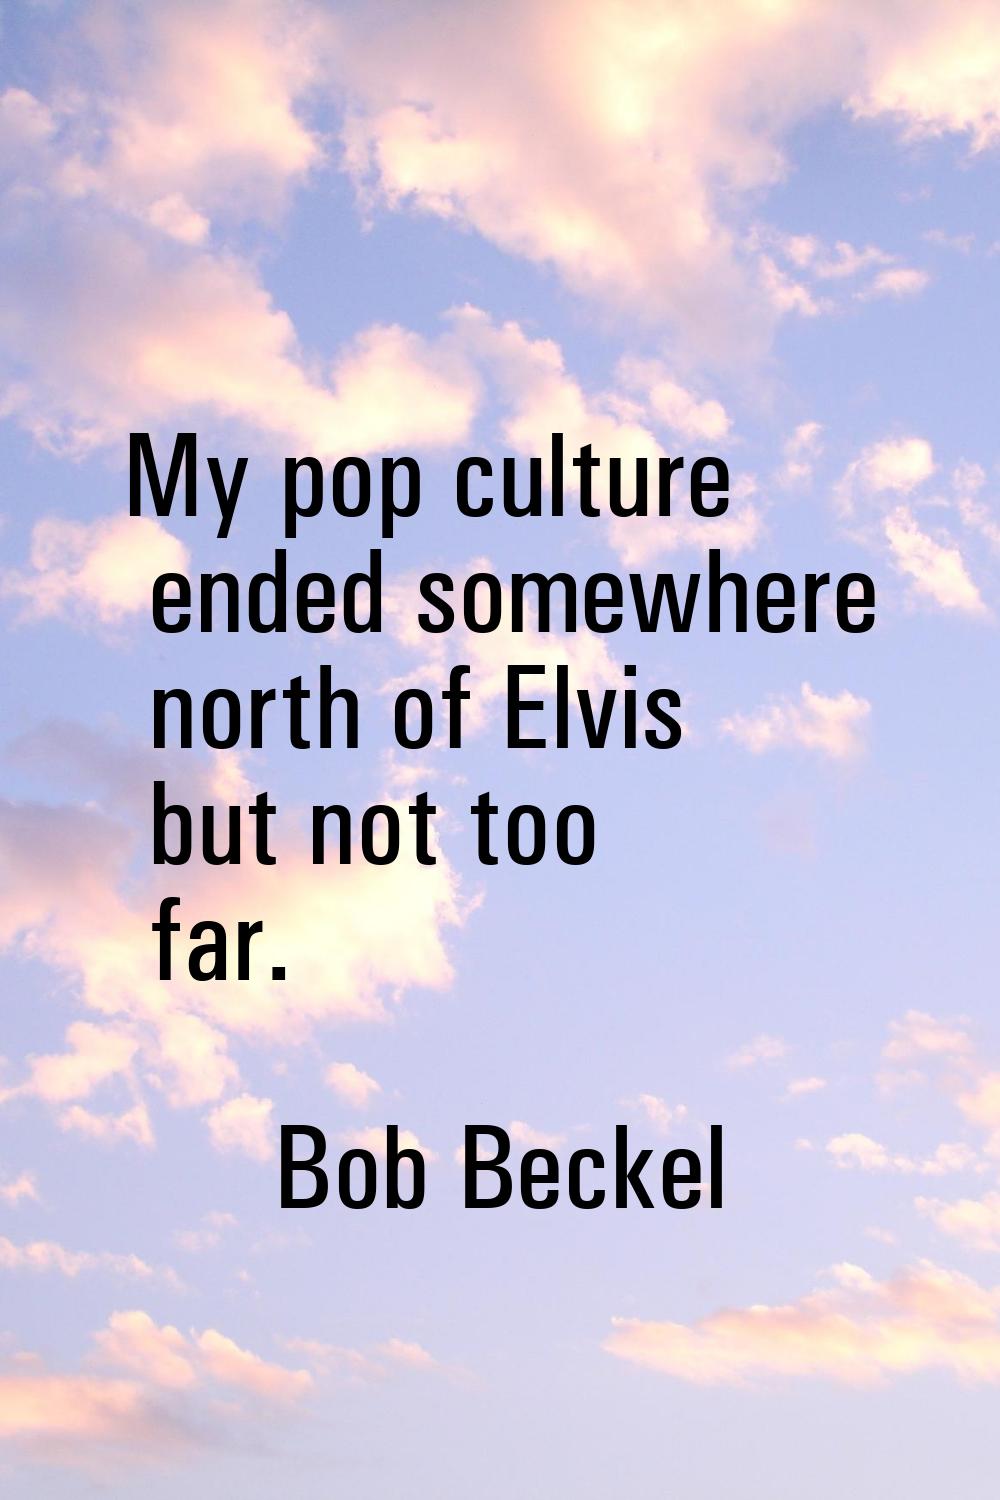 My pop culture ended somewhere north of Elvis but not too far.